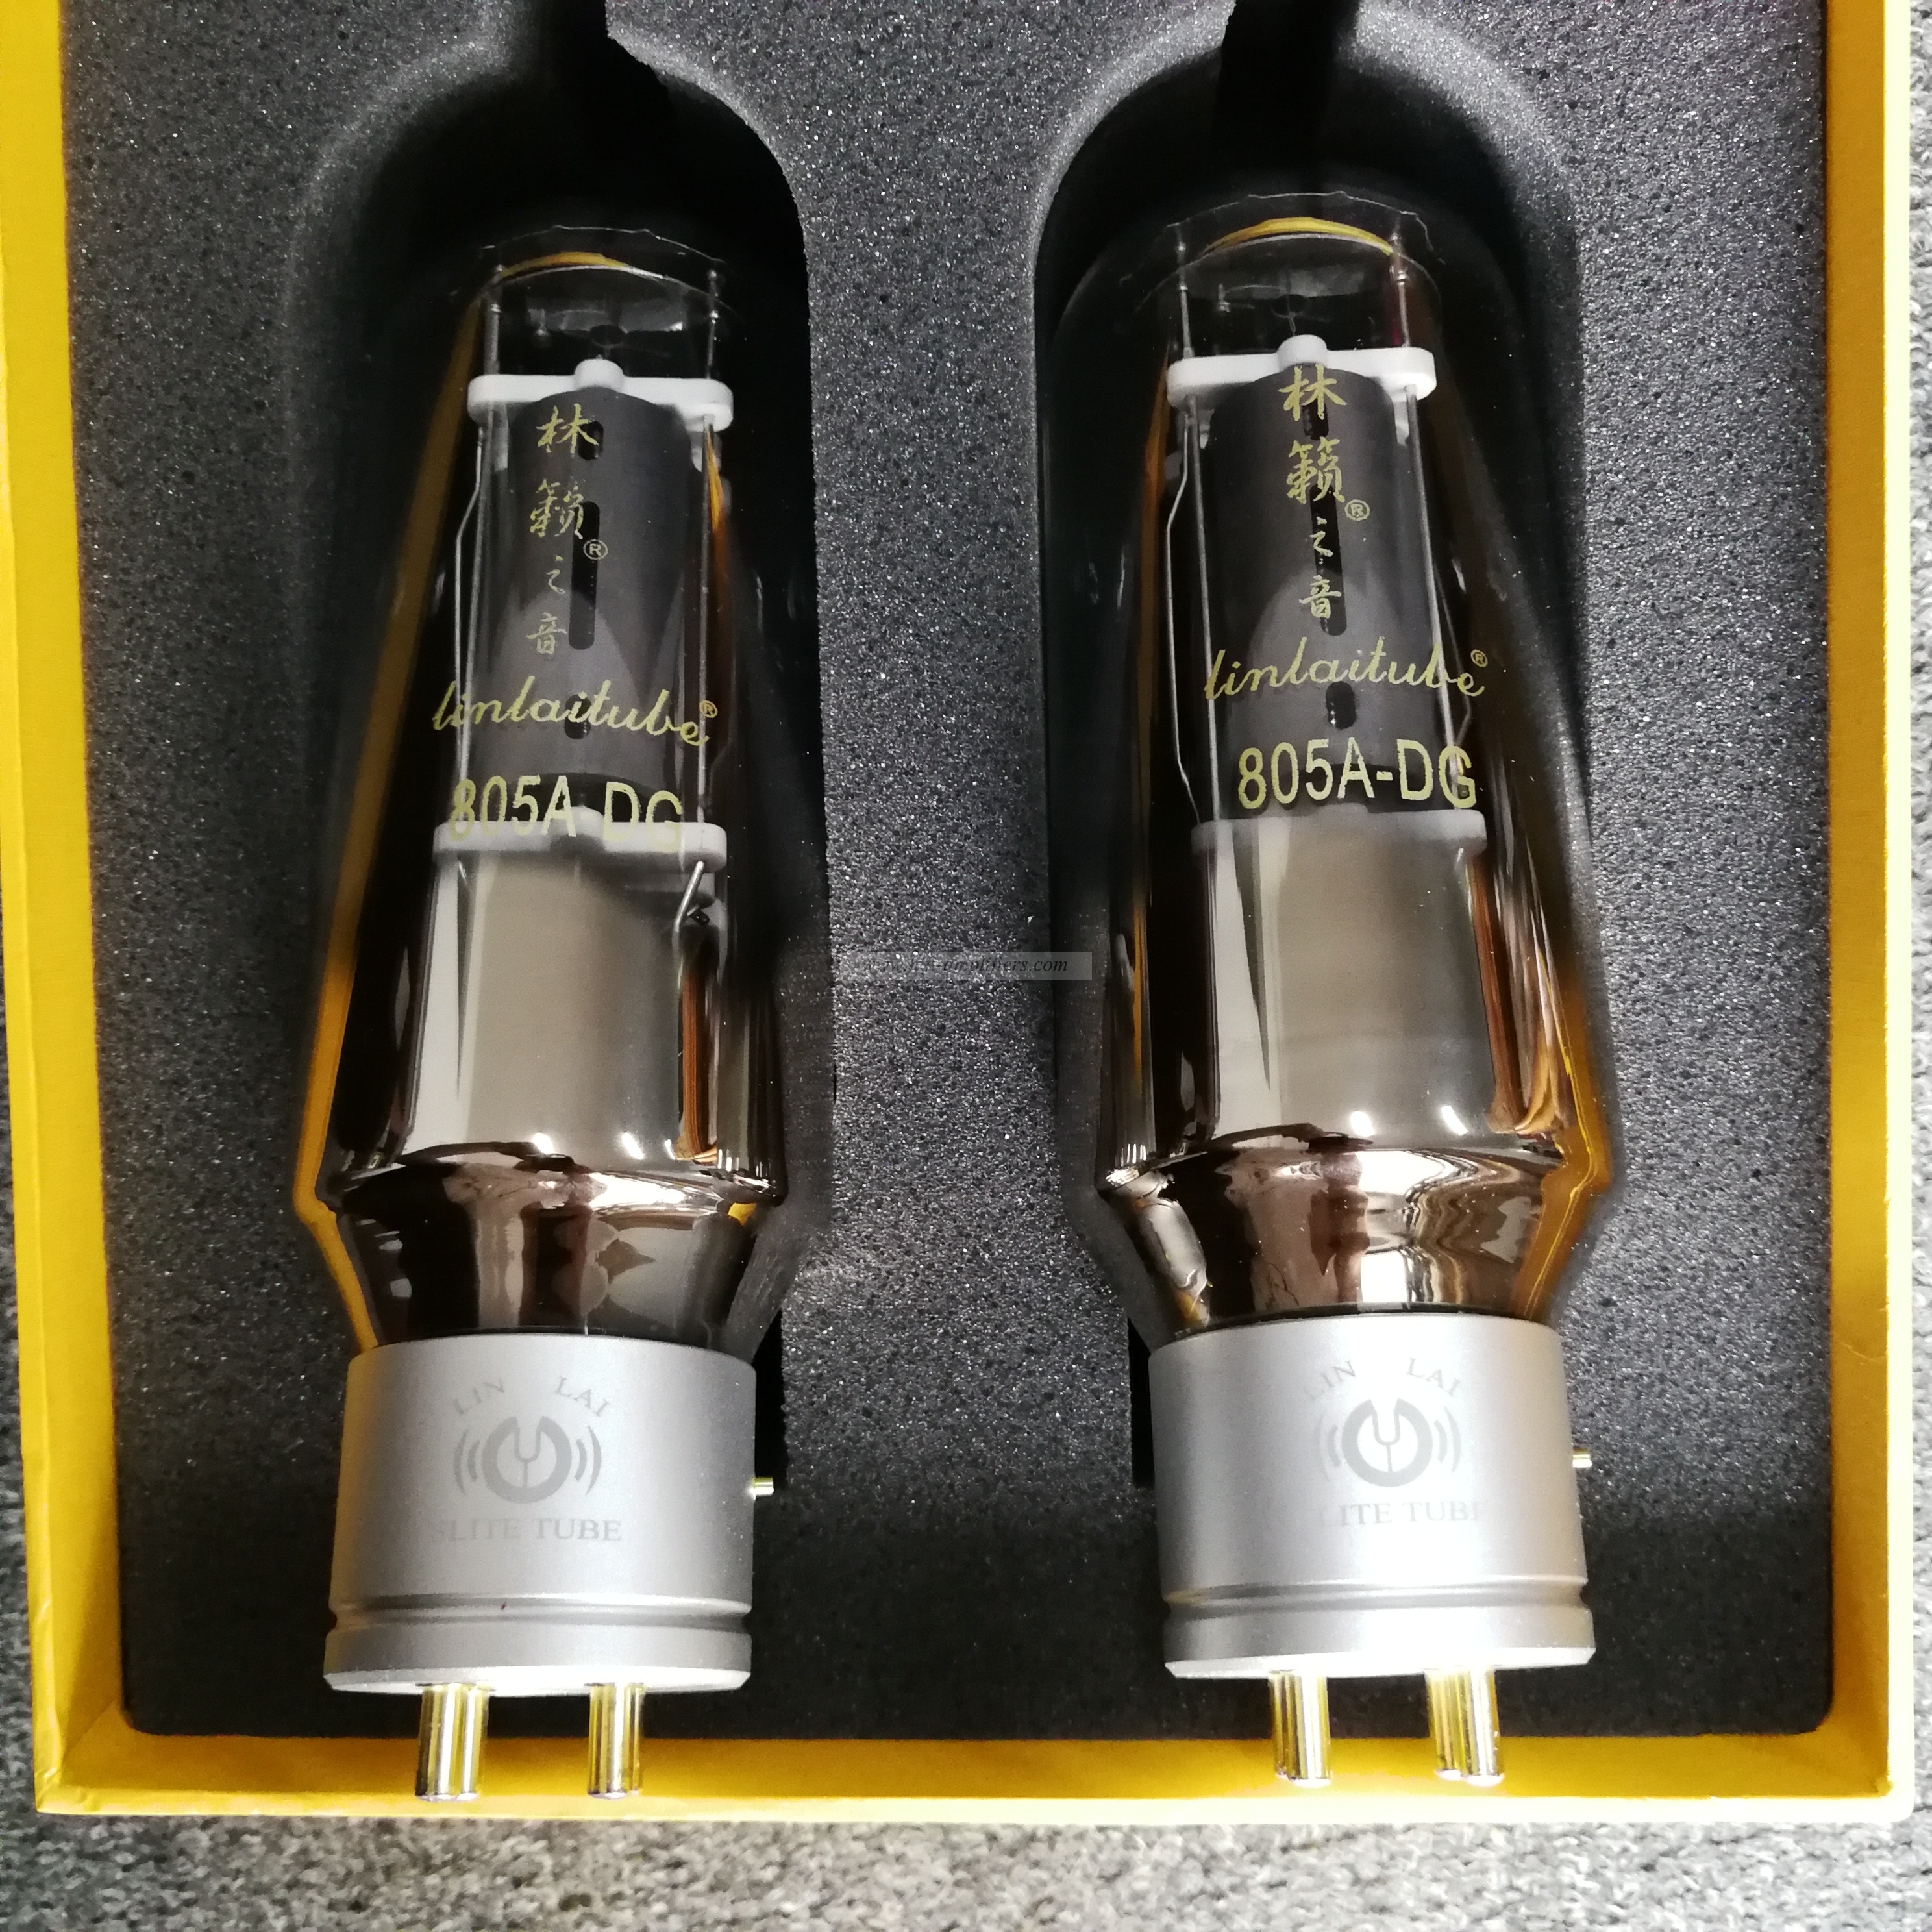 LINLAI 805A-DG 805ADG 805A Vacuum Tube Upgrade 805A/805M/805AT Electronic Tube Matched Pair